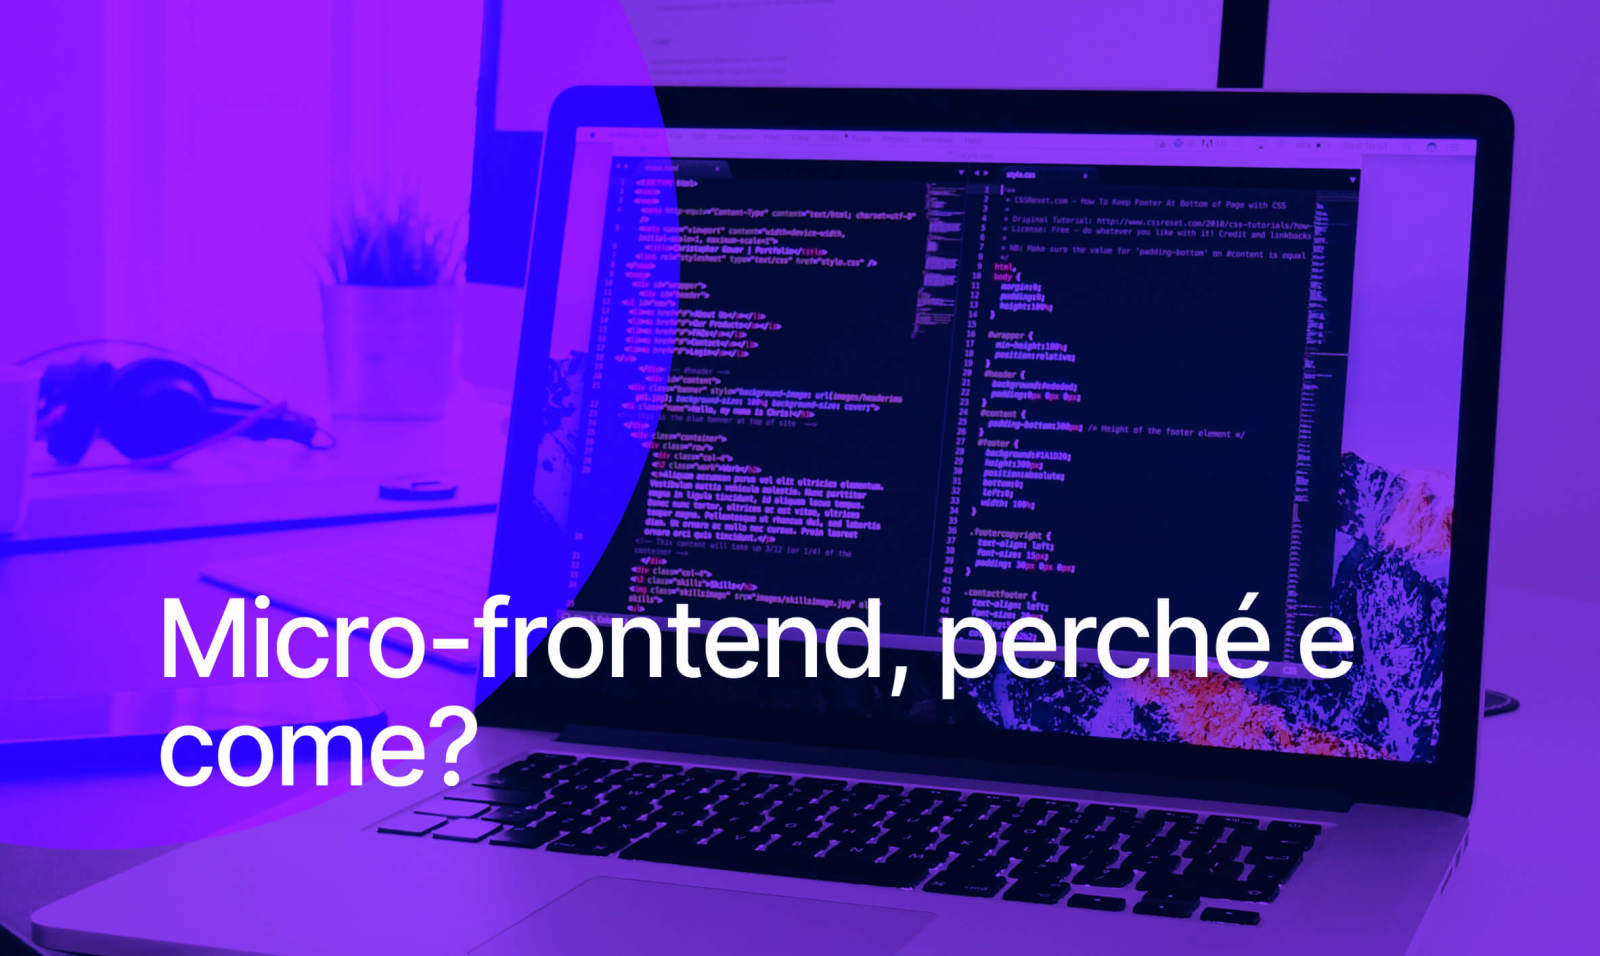 Micro-frontends, why and how?